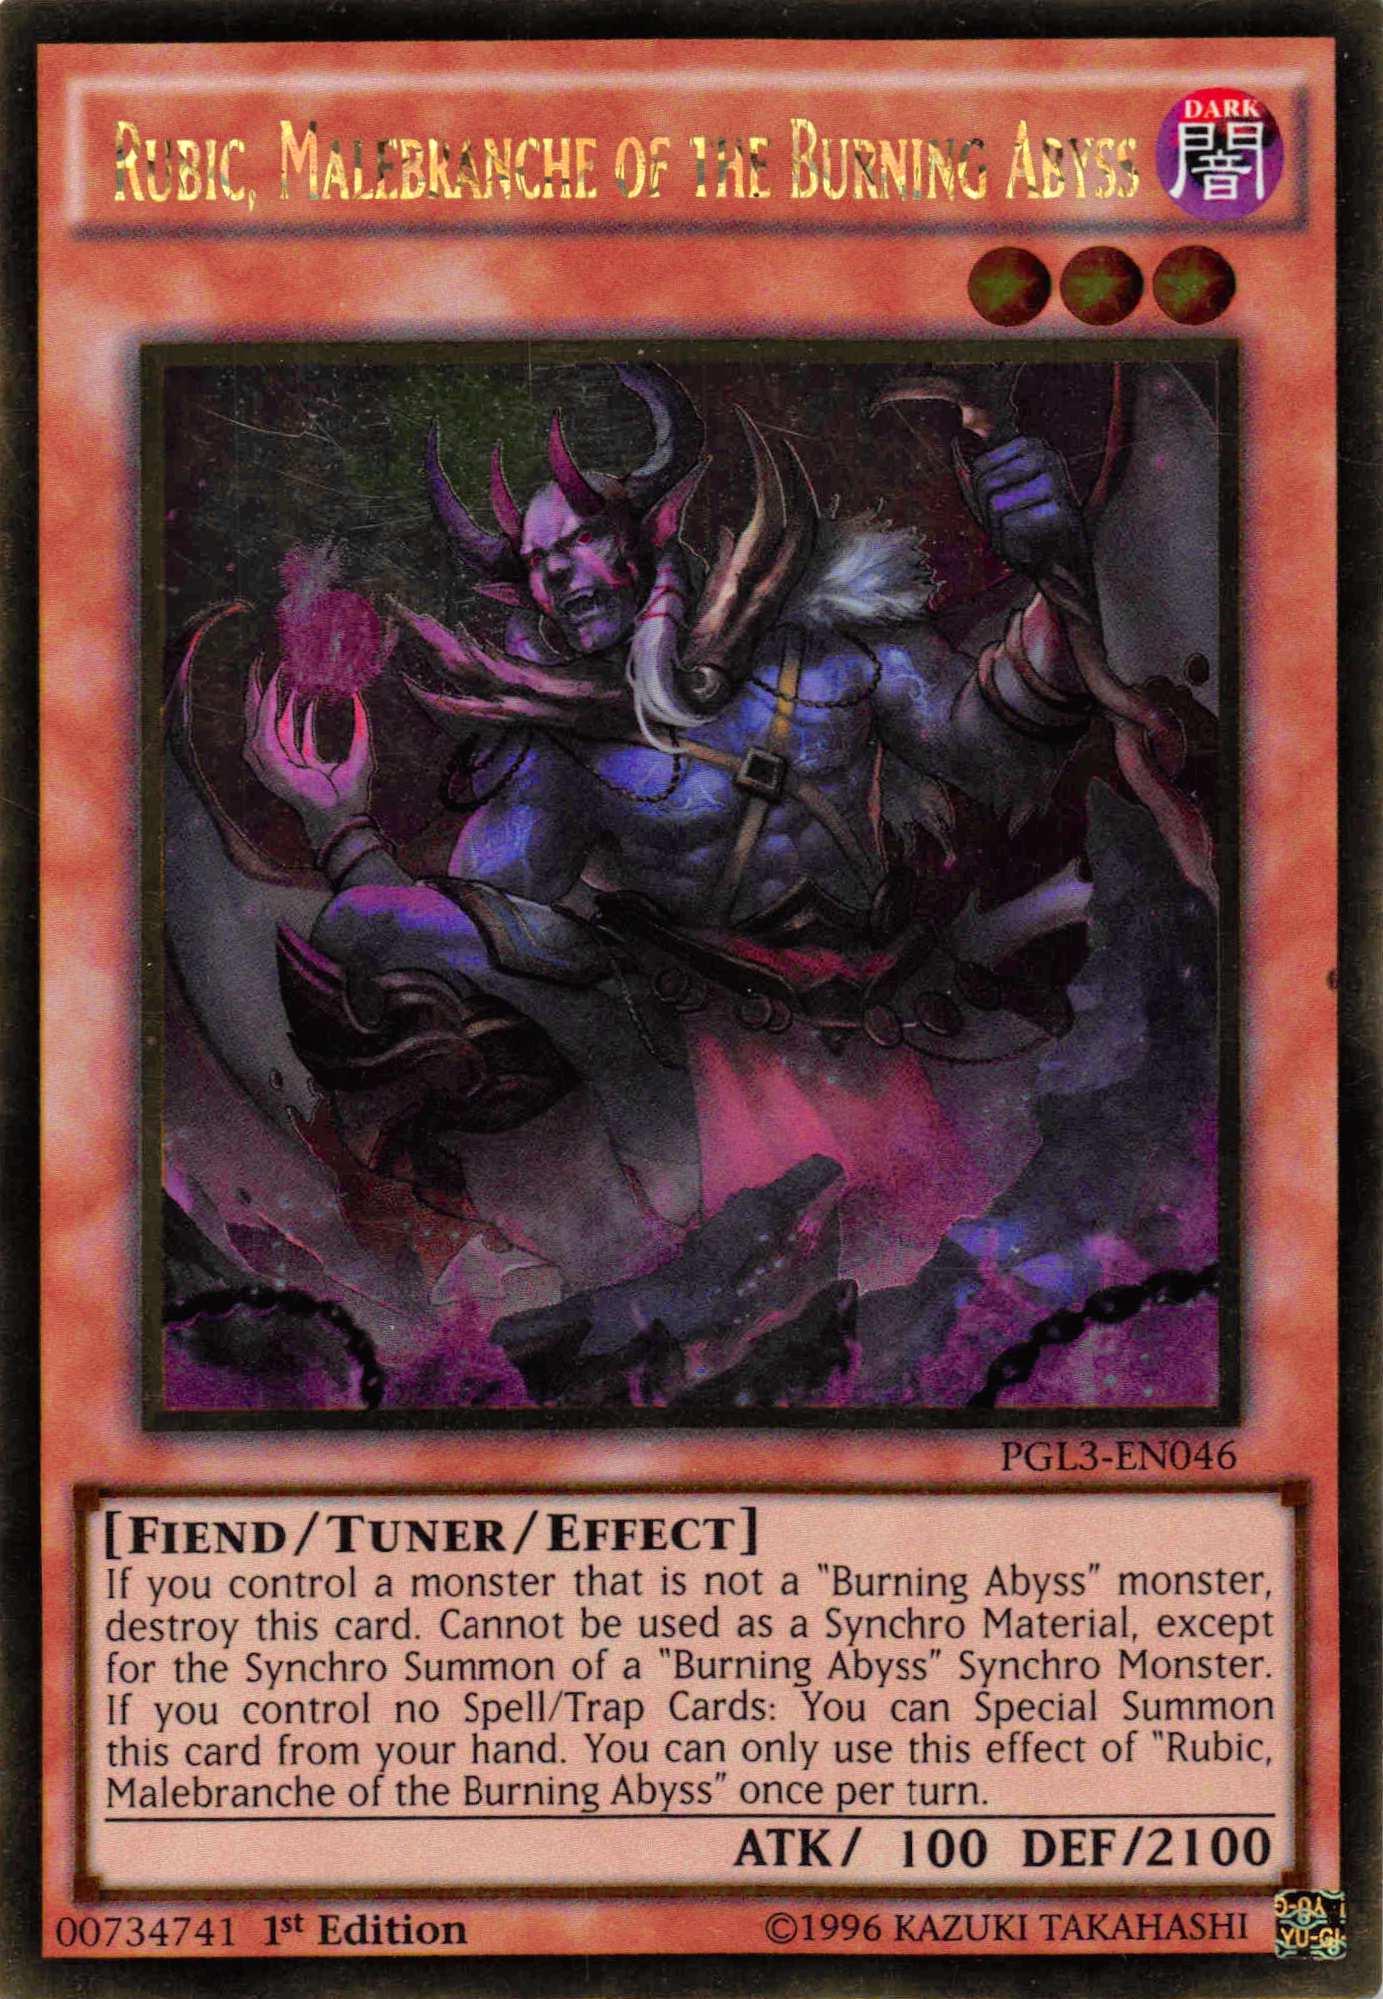 Rubic, Malebranche of the Burning Abyss [PGL3-EN046] Gold Rare